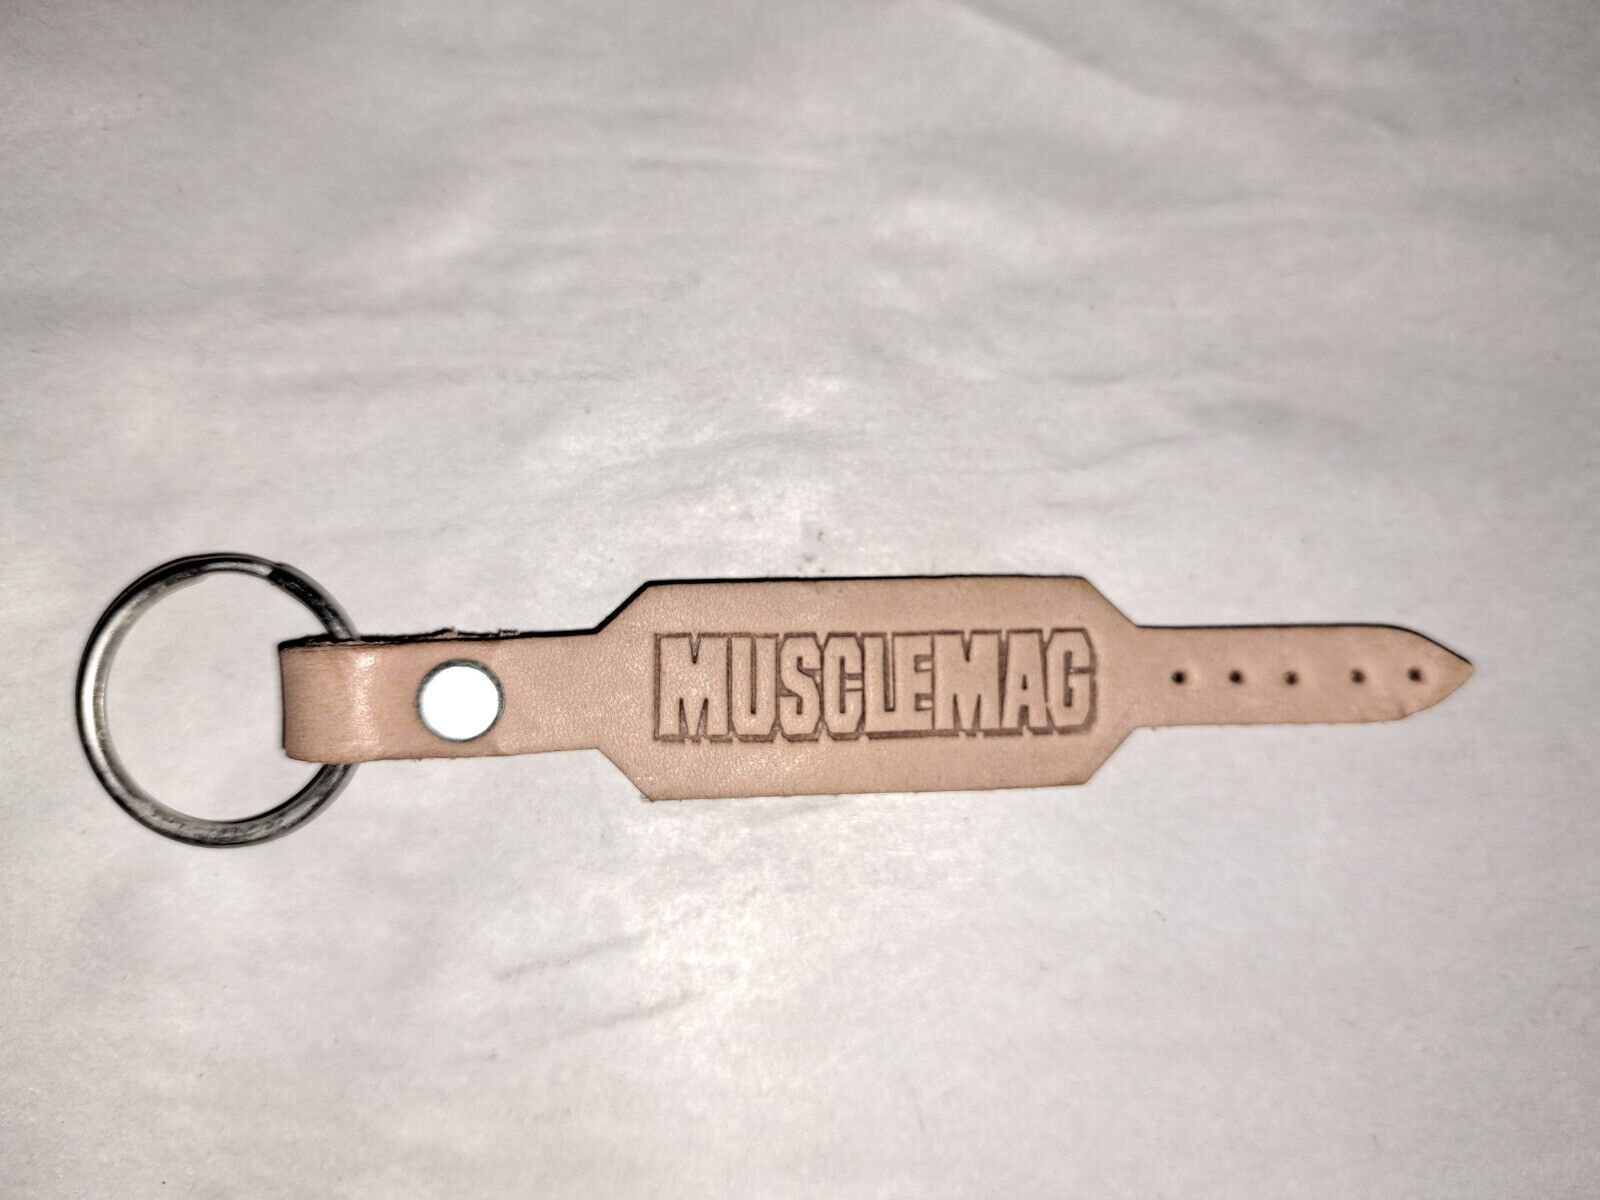 Musclemag Keychain Vintage 1990s NEW VERY RARE Promotional Fitness Exercise 